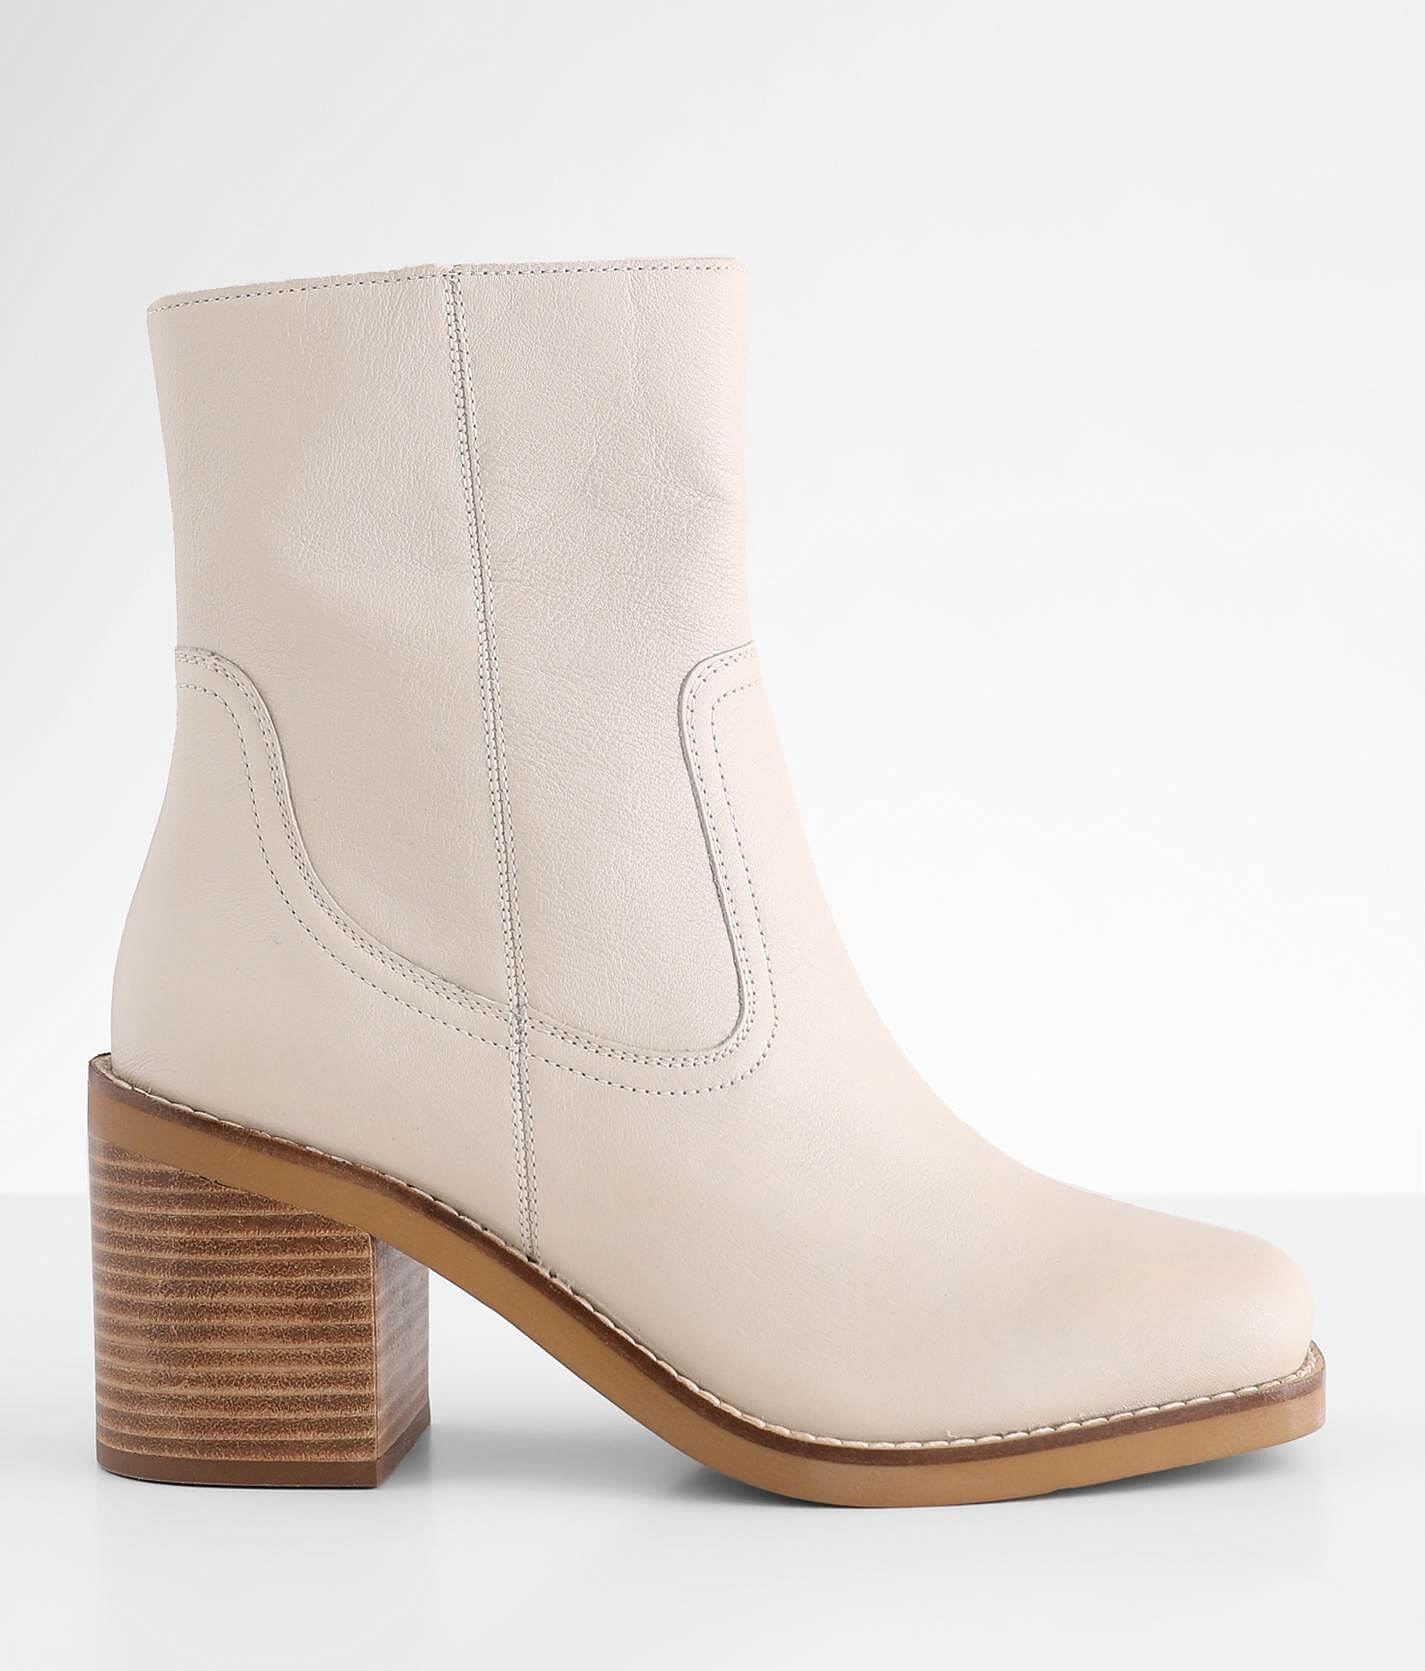 Seychelles Brooklyn Women's Shoes Off-White Leather : 8.5 M